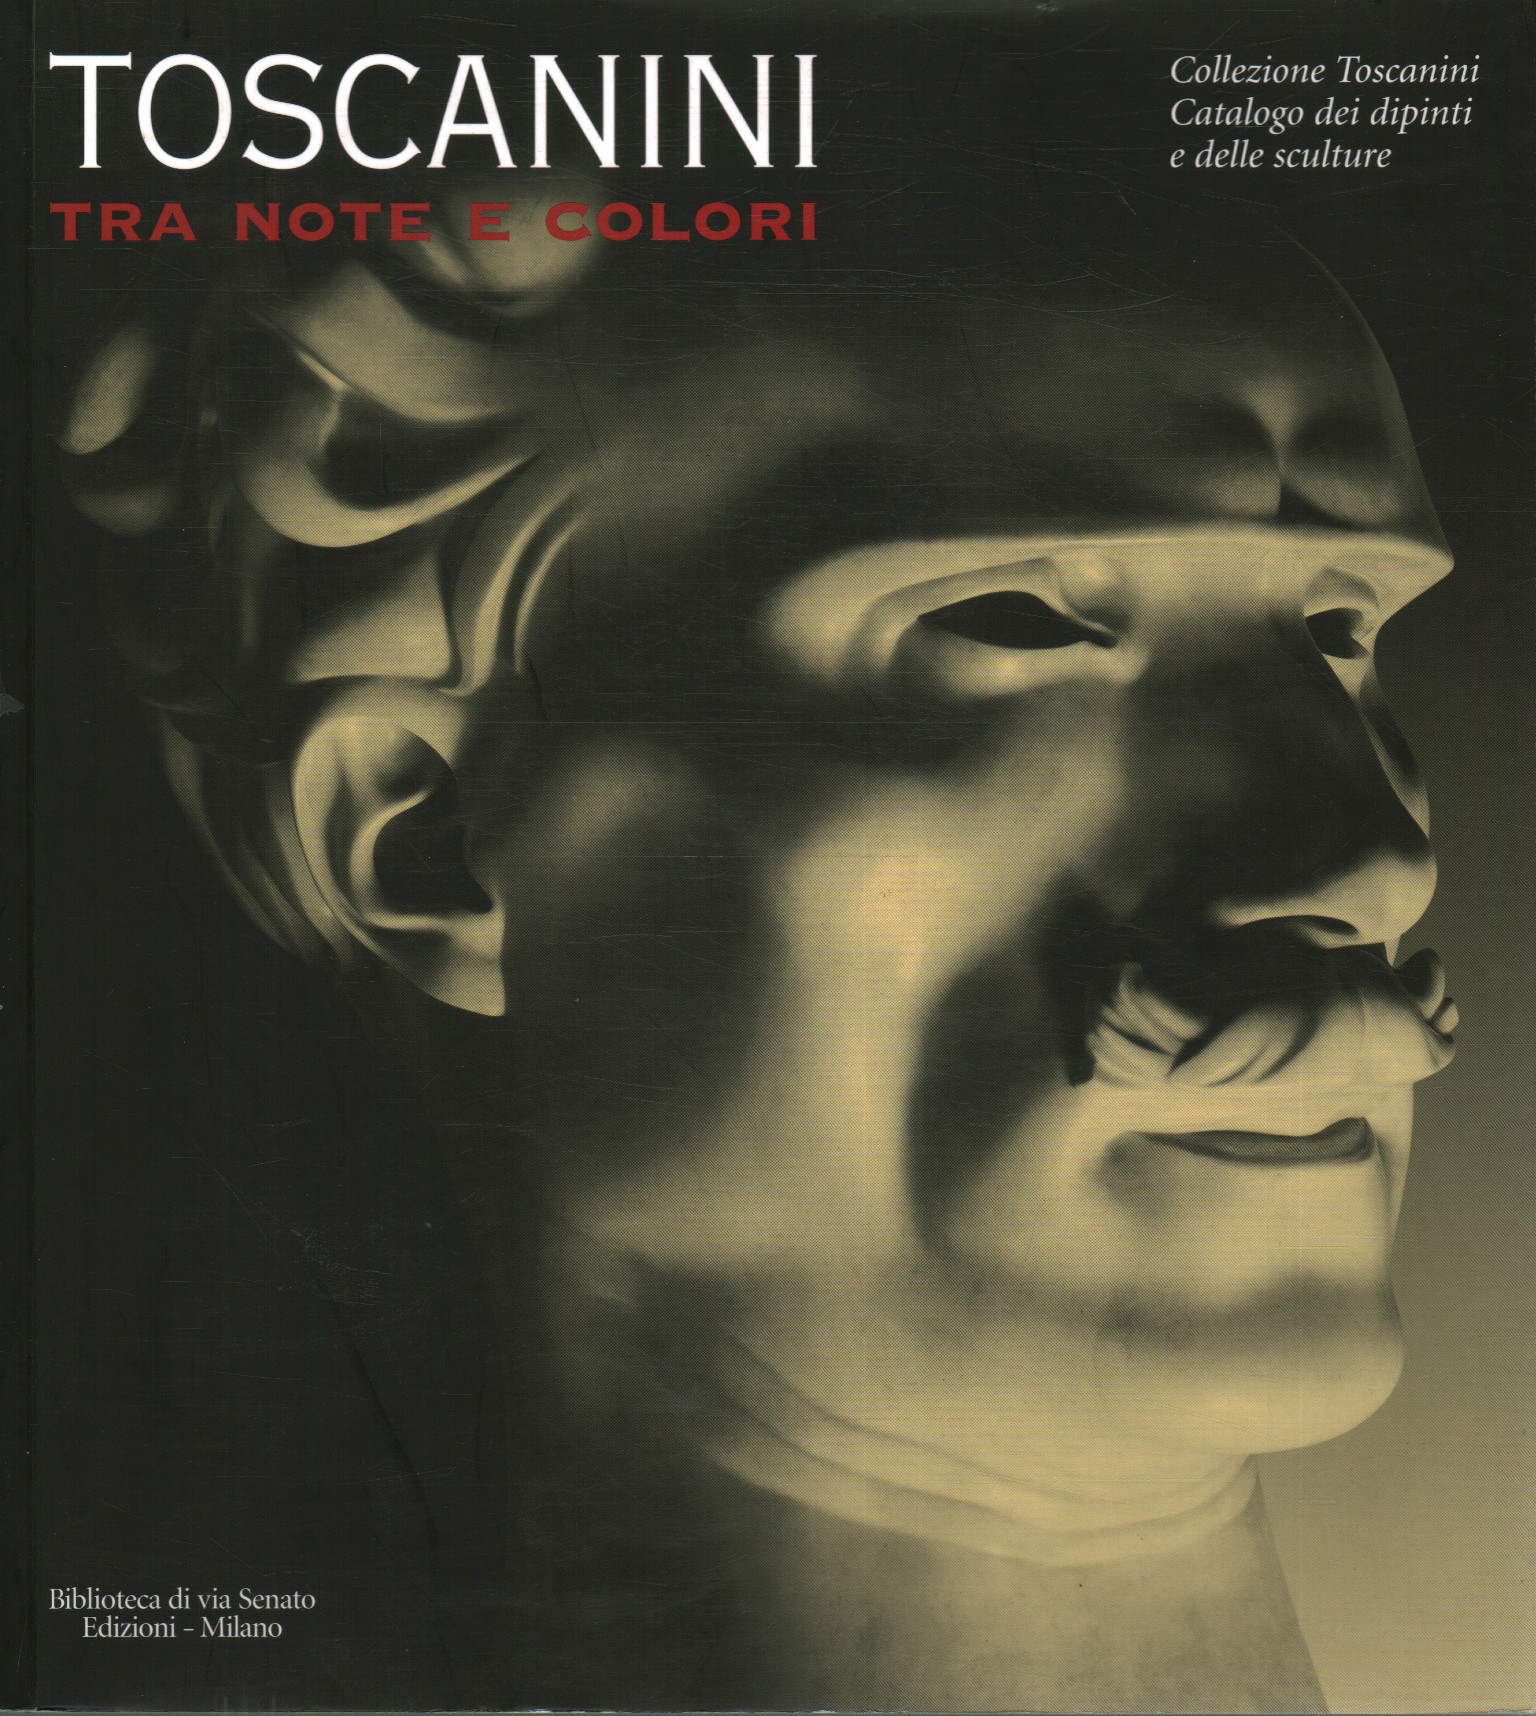 Toscanini between notes and colors